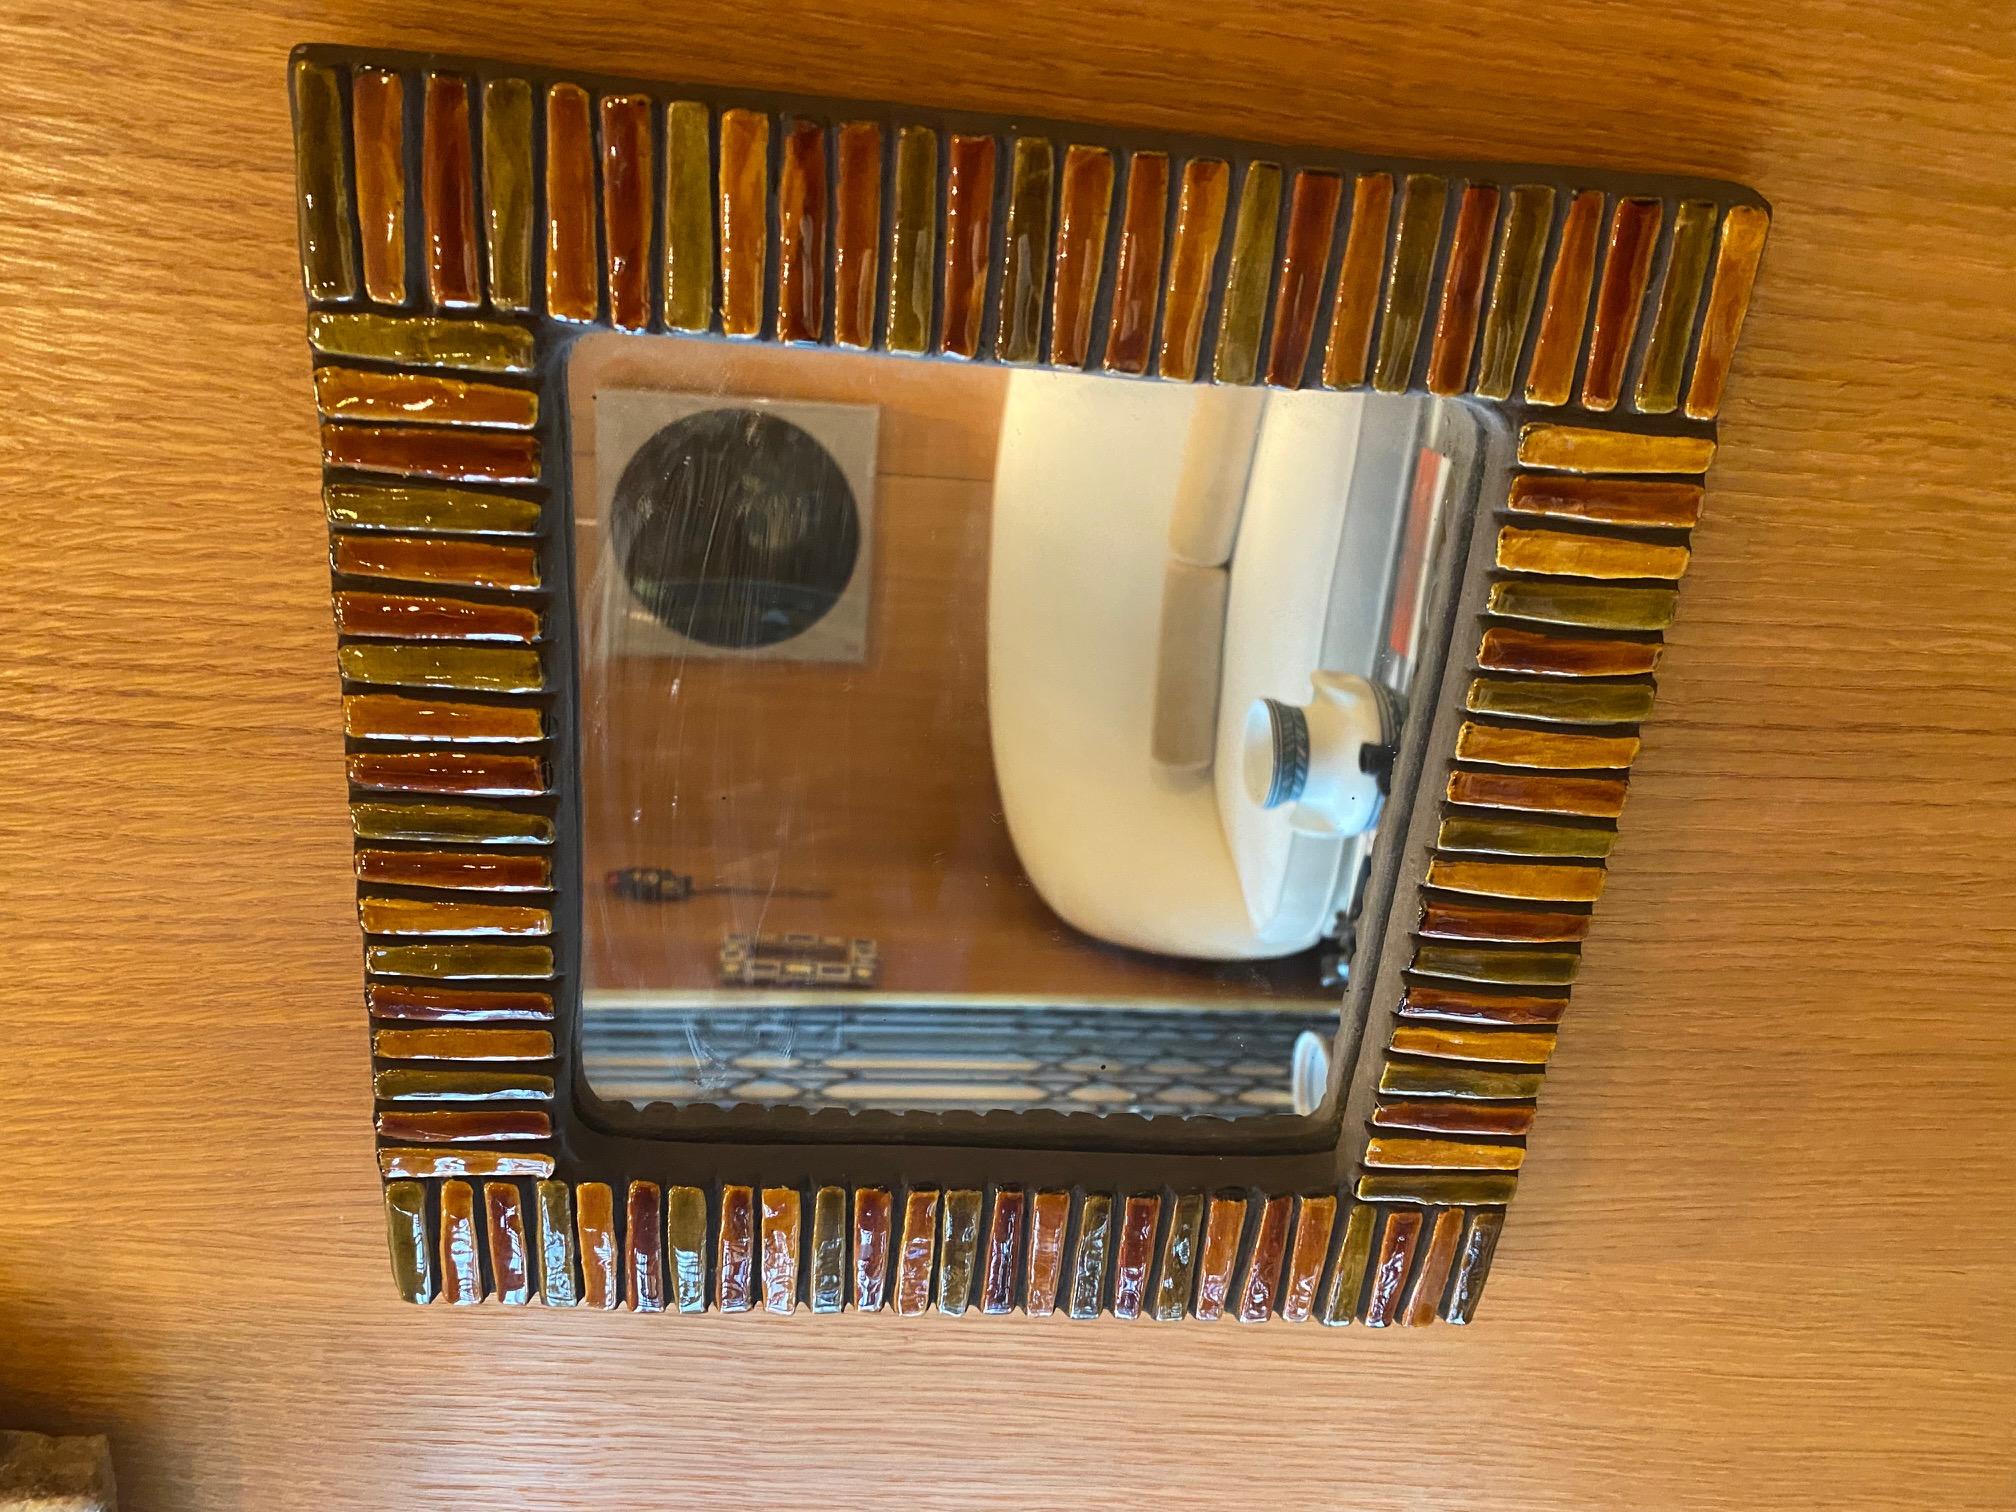 French Ceramic Mirror by Mithé Espelt, France, 1970s For Sale